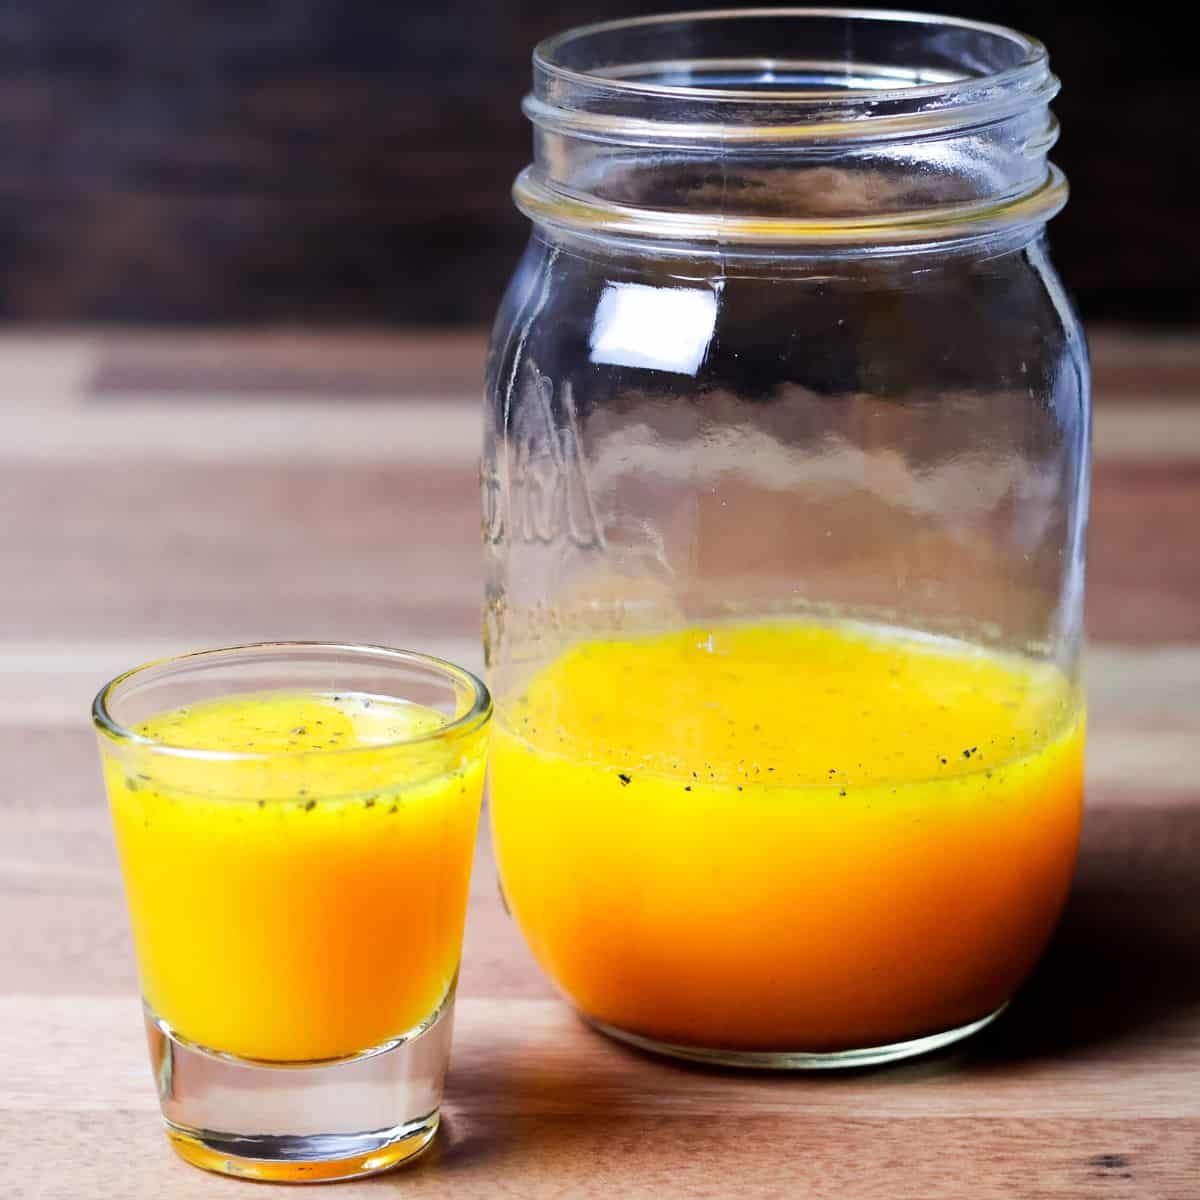 A small glass filled with bright yellow anti-inflammatory juice alongside a larger mason jar half full of the same juice, on a wooden surface.